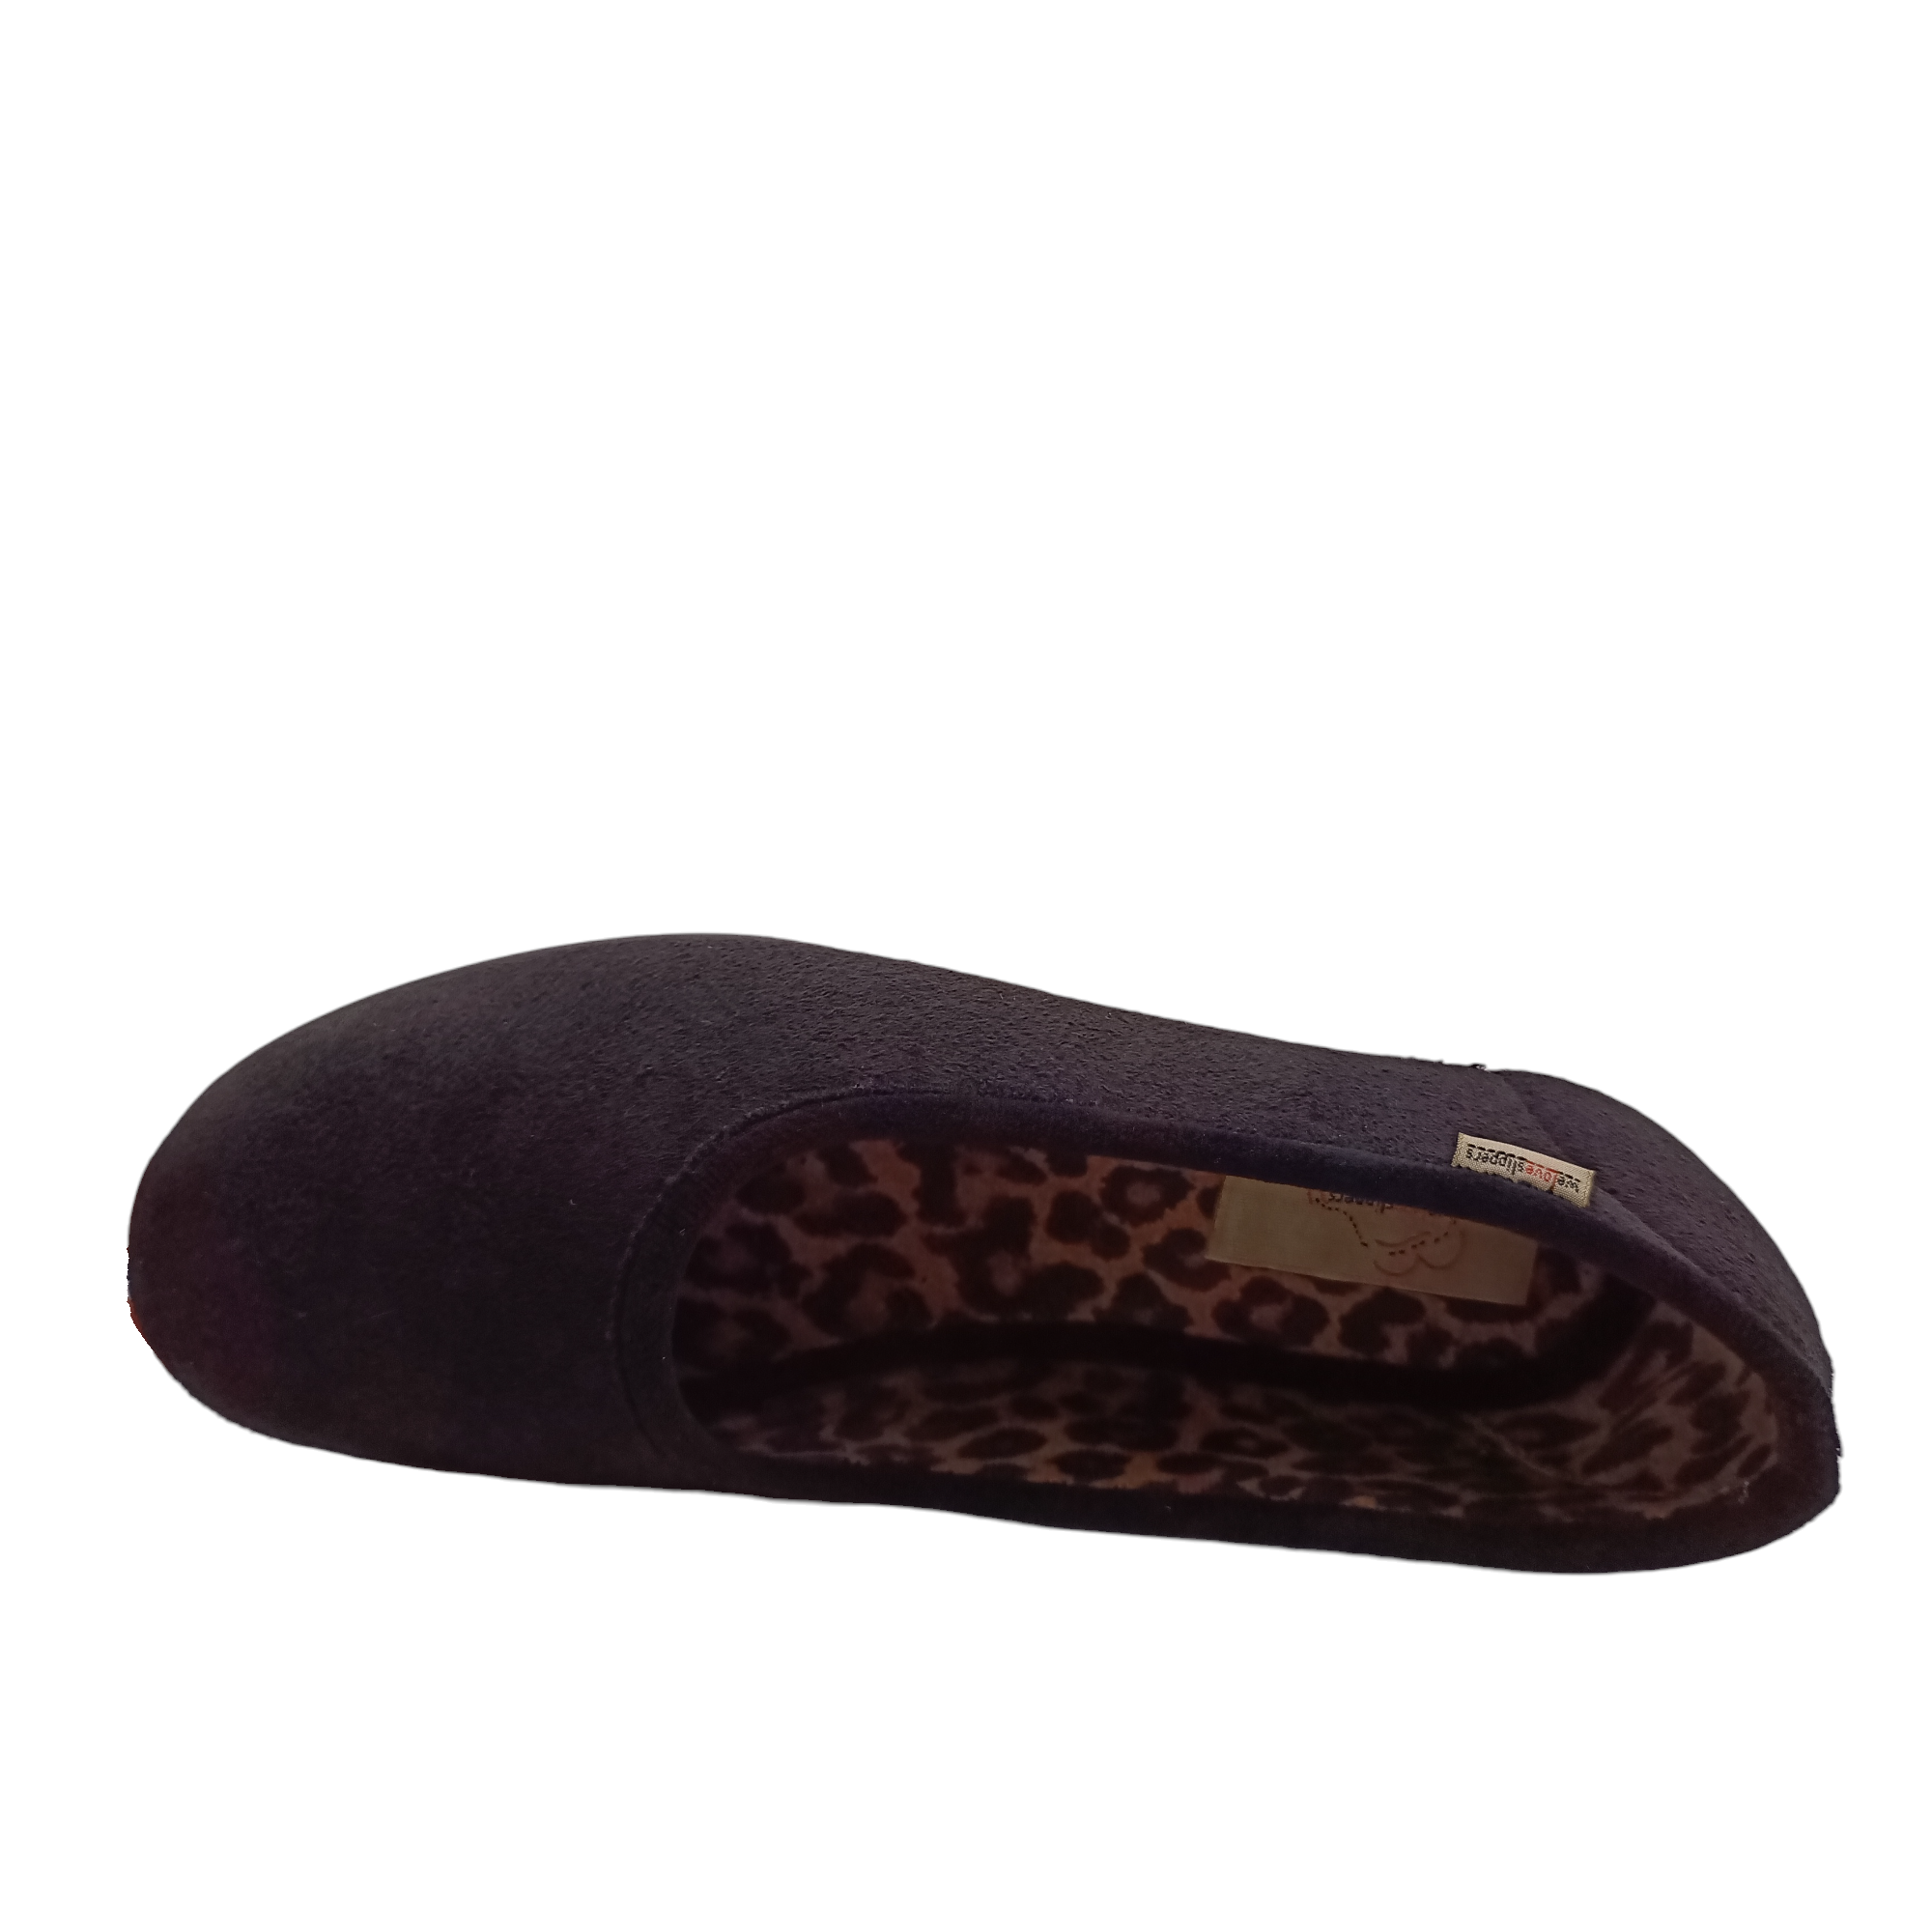 Top view of black Nuzzle Slippers with leopard print lining. Shop Womens Slippers and Shoes Online and In-store with shoe&amp;me.